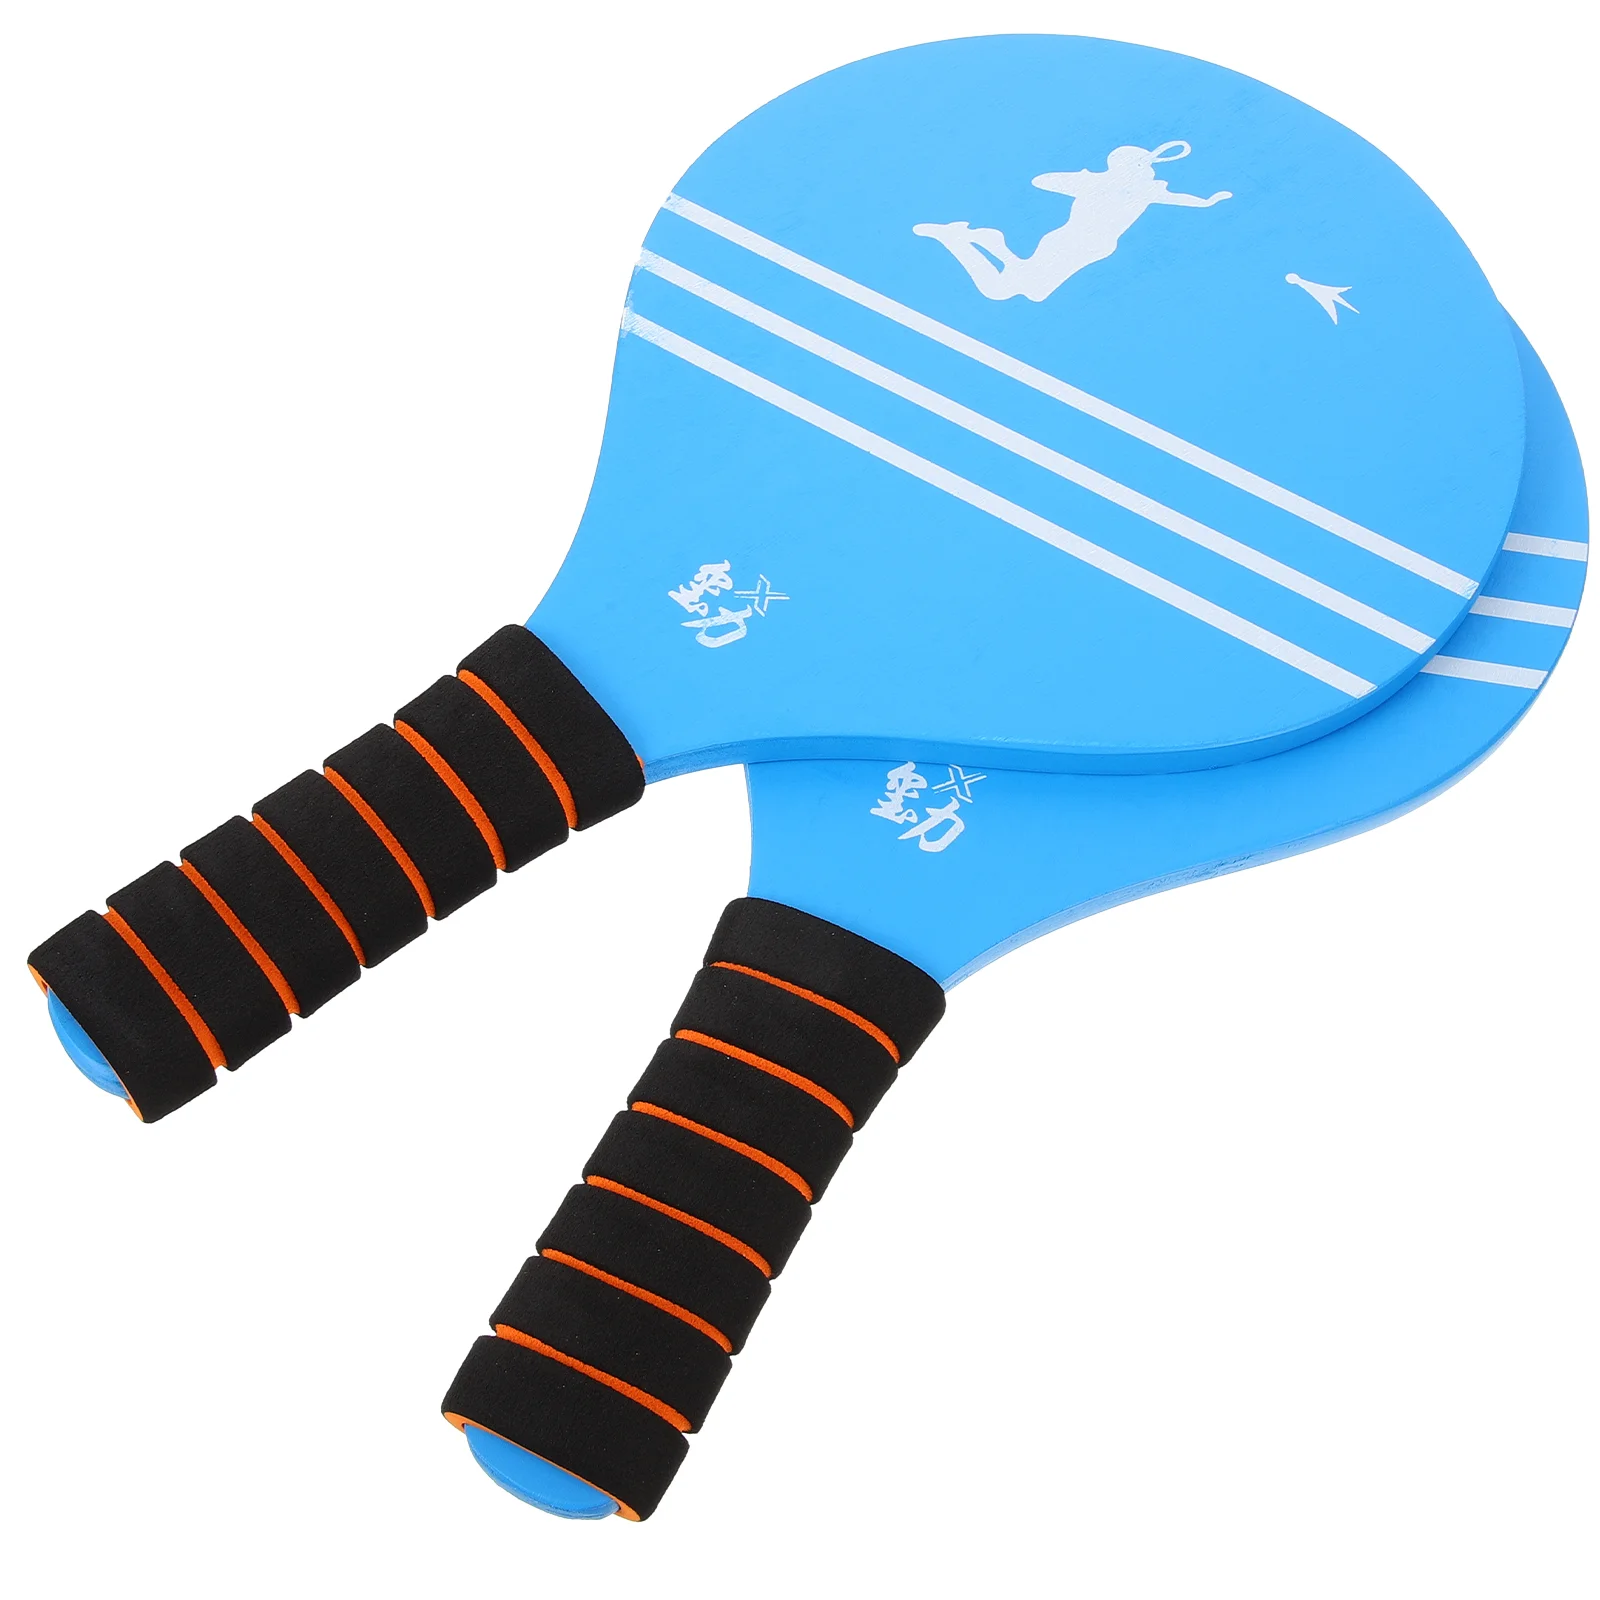 

2 Pcs Racket Sweat Suit Beach Ball Durable Paddle Rackets Outdoor Badminton Wood Paddles Fitness